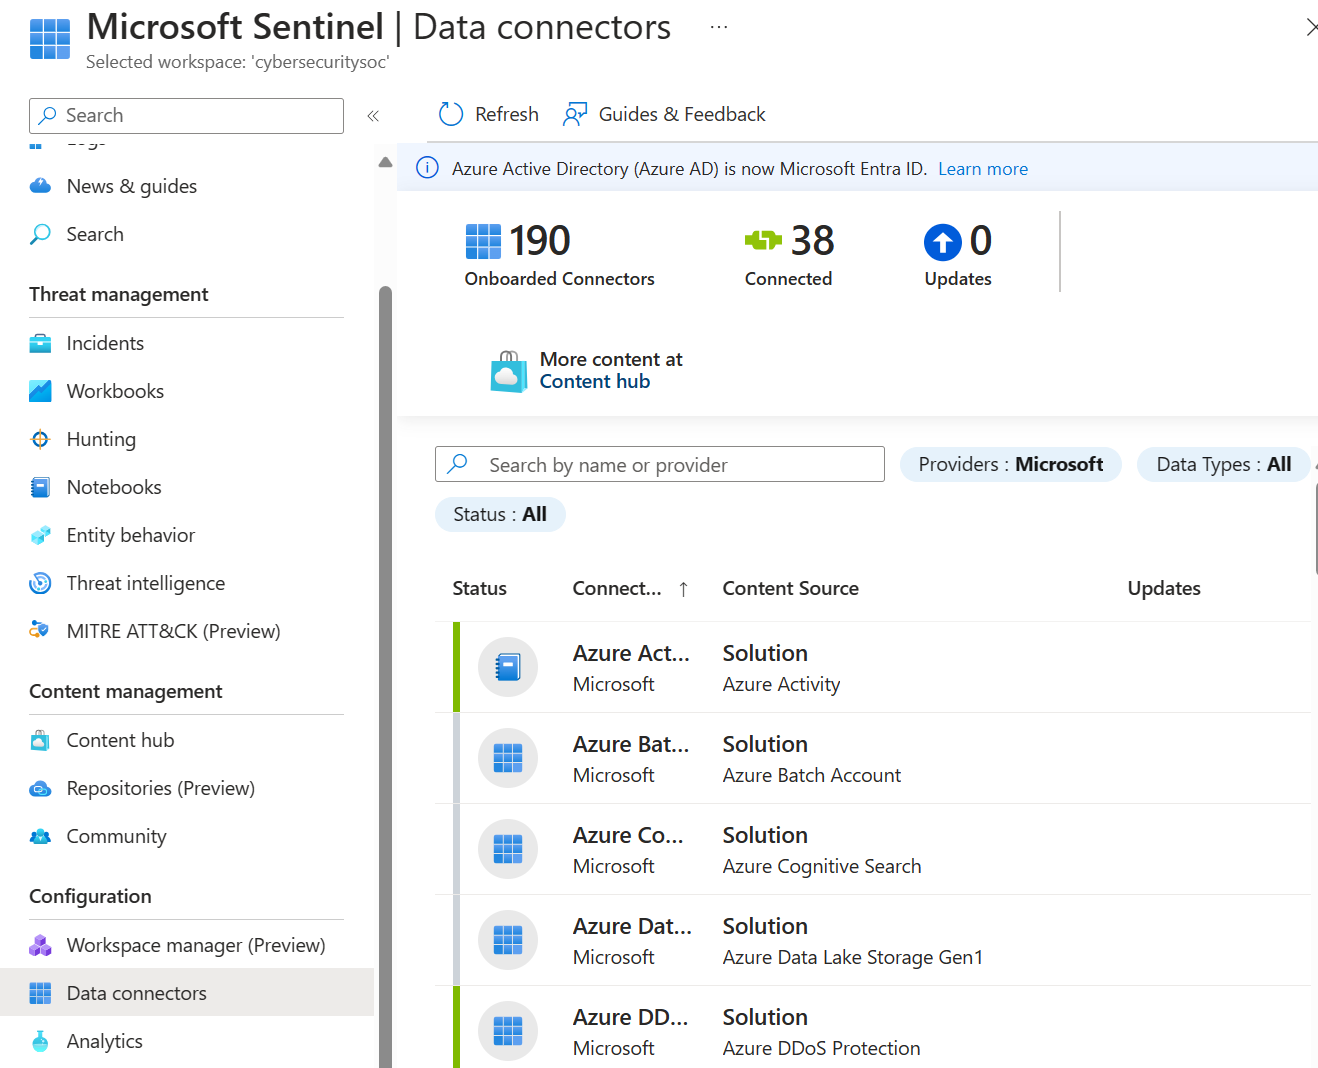 Screenshot of the data connectors page in Microsoft Sentinel that shows a list of available connectors.